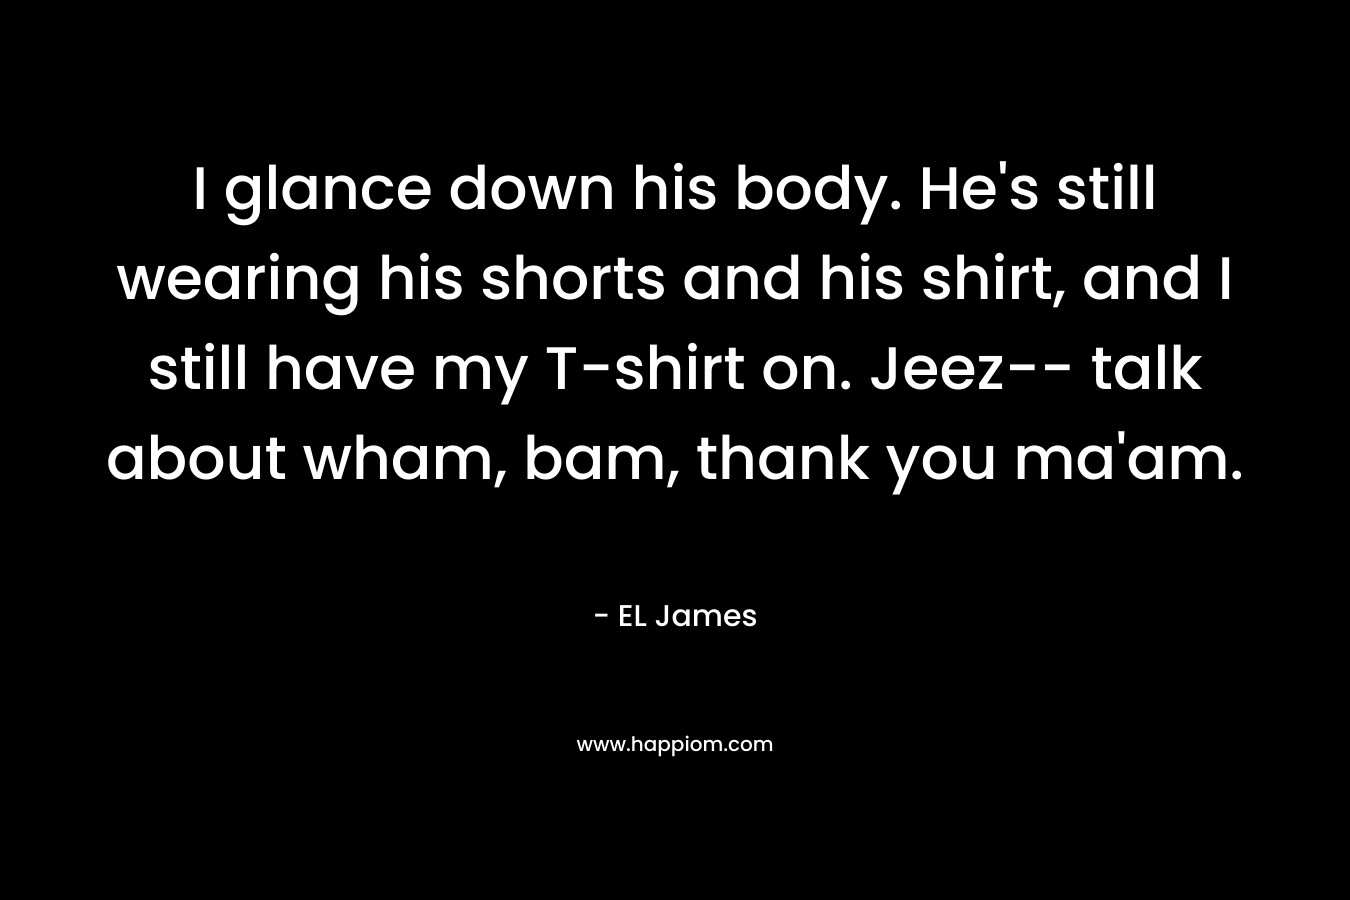 I glance down his body. He’s still wearing his shorts and his shirt, and I still have my T-shirt on. Jeez– talk about wham, bam, thank you ma’am. – EL James